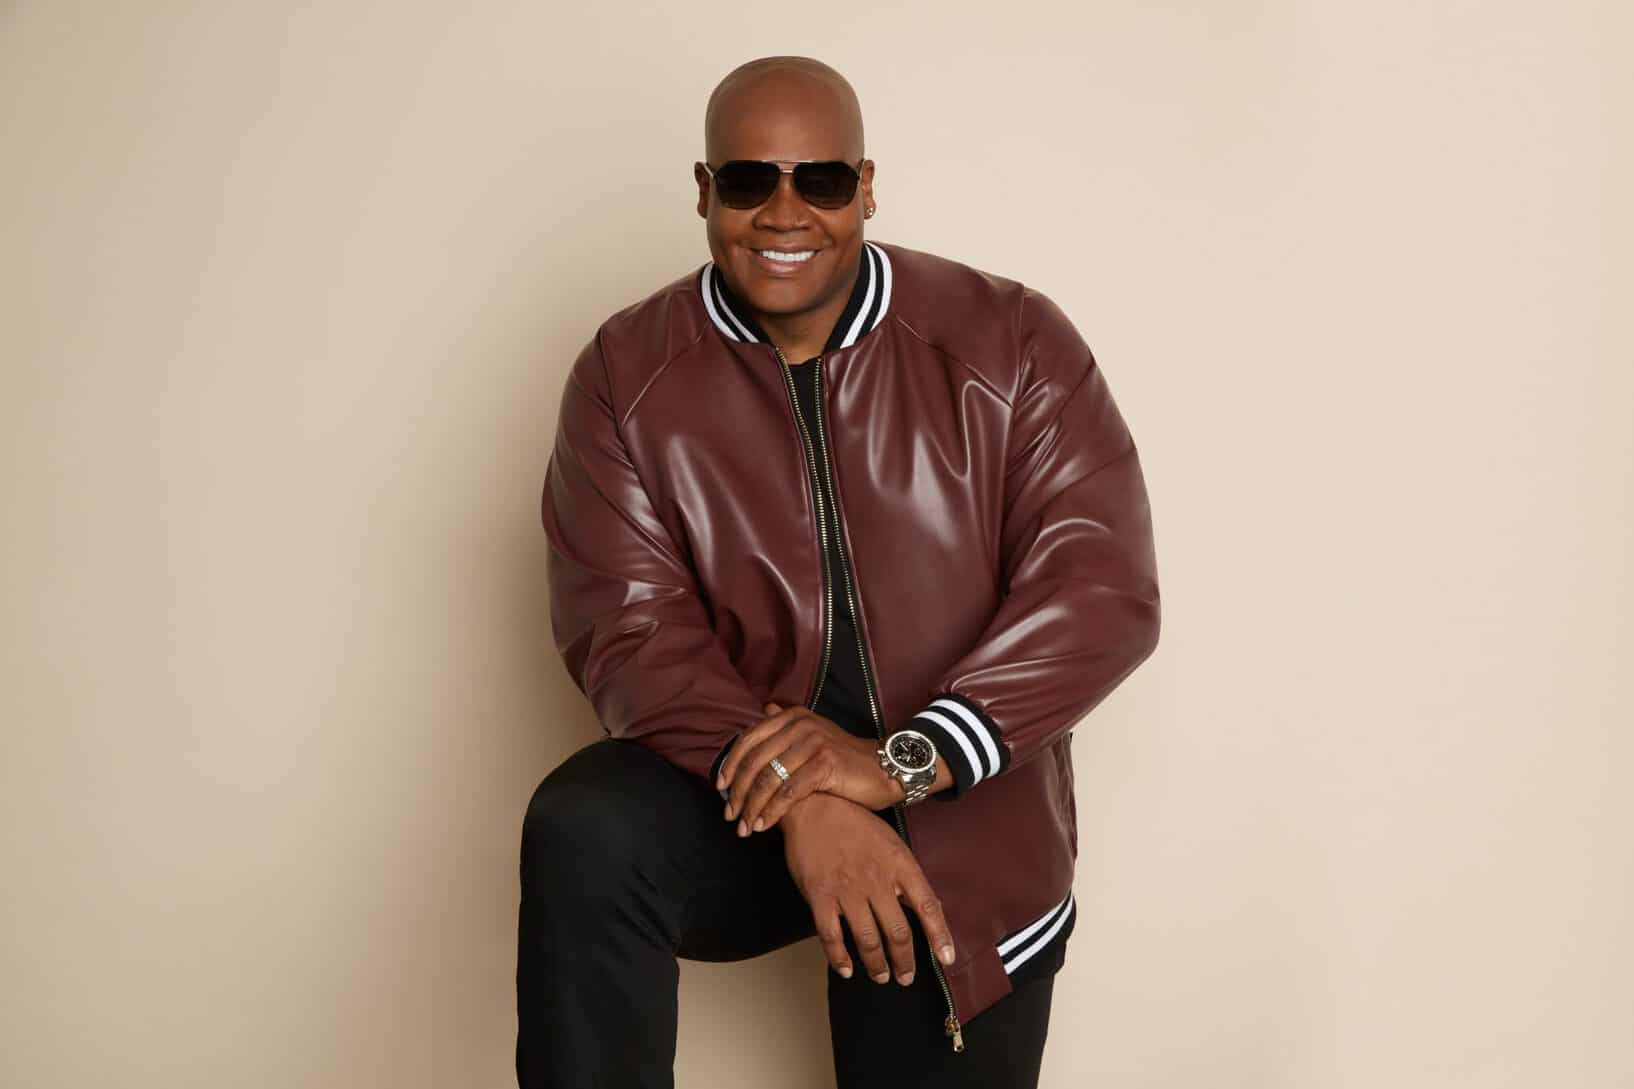 BASEBALL LEGEND FRANK THOMAS JOINS FORCES WITH BIG & TALL CLOTHING